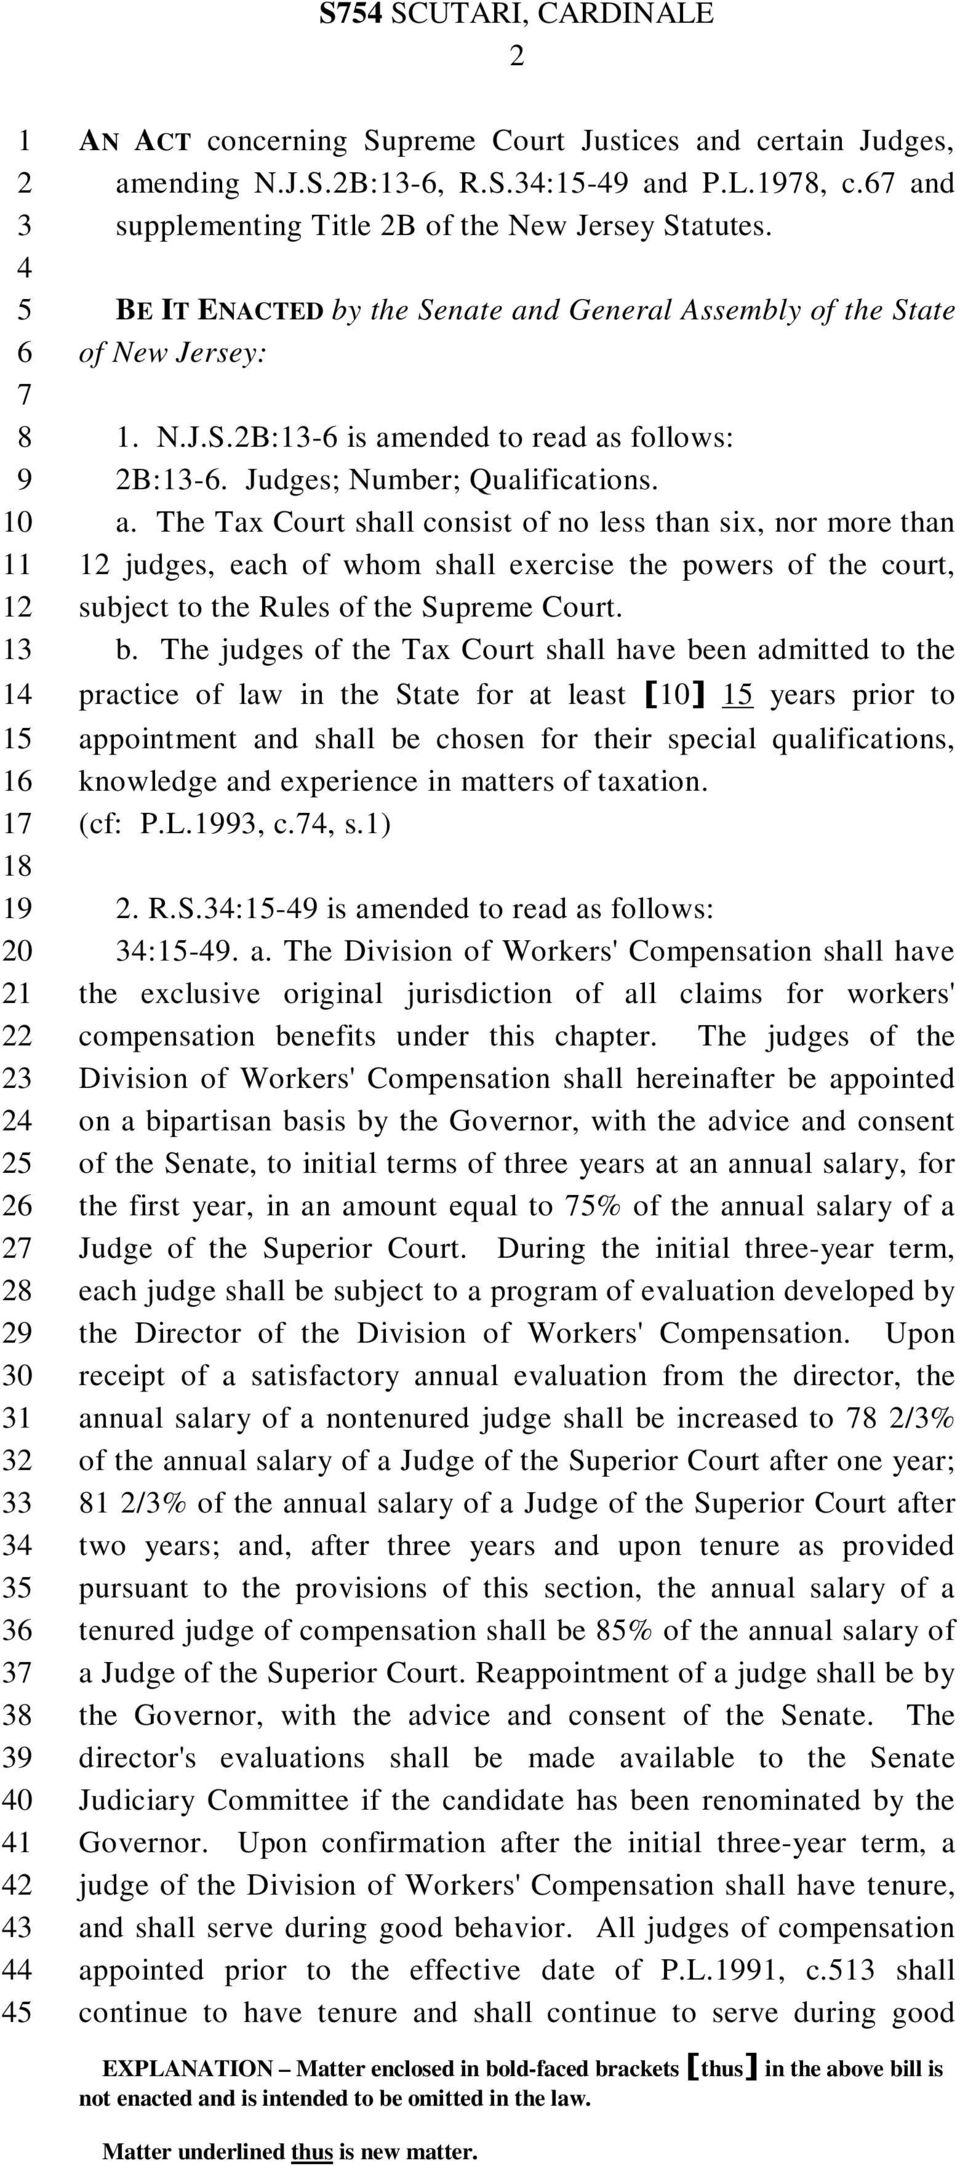 b. The judges of the Tax Court shall have been admitted to the practice of law in the State for at least [0] years prior to appointment and shall be chosen for their special qualifications, knowledge